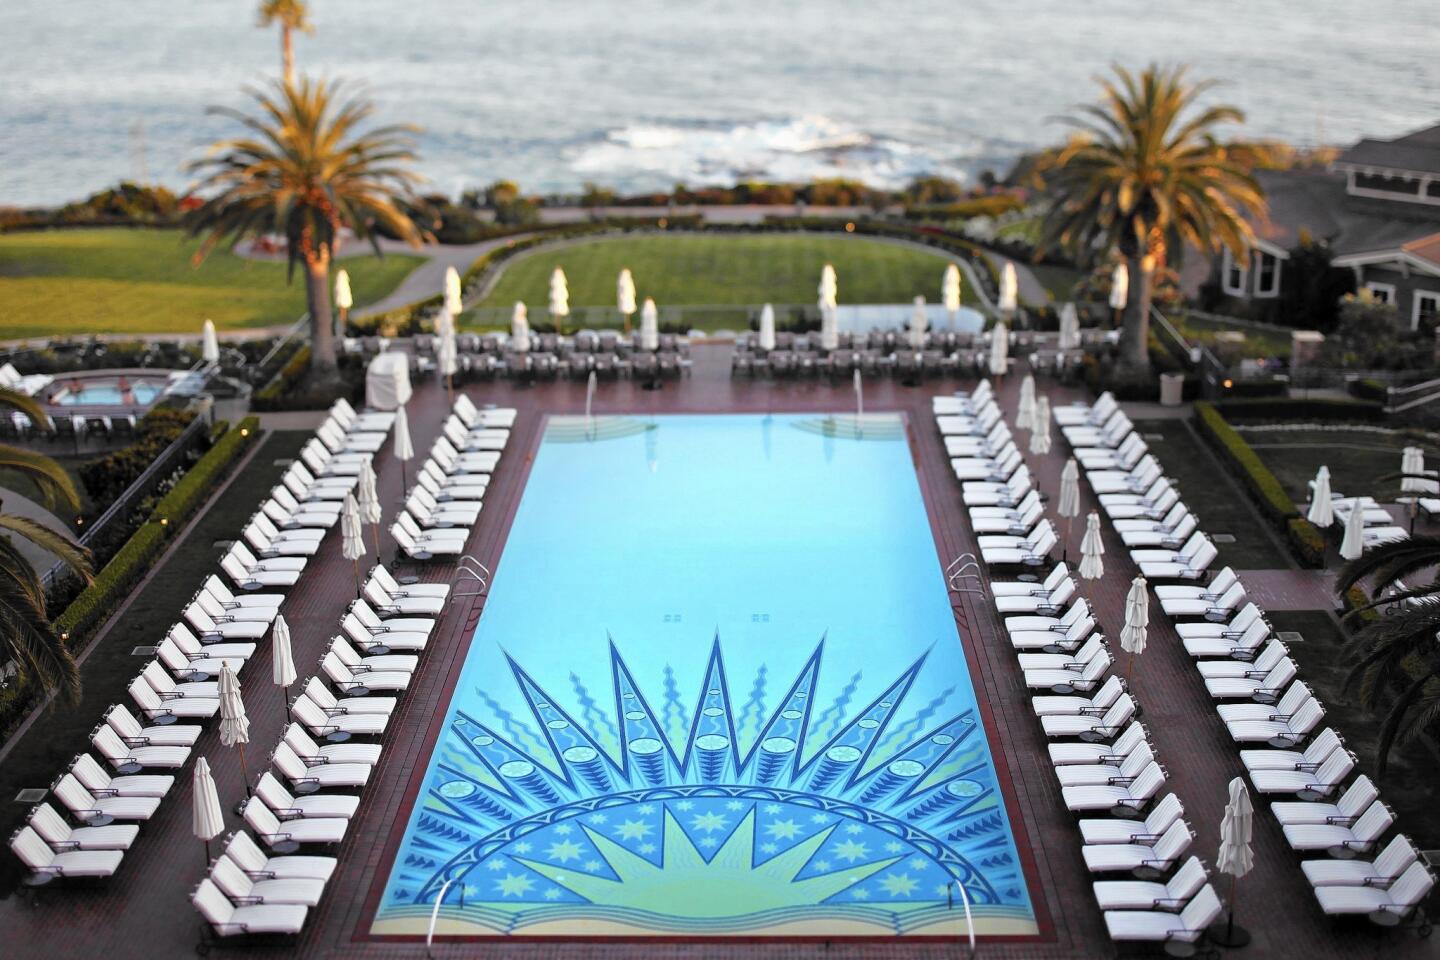 Strategic Hotels & Resorts Inc. is buying the 250-room Montage Laguna Beach from an affiliate of Ohana Real Estate Investors.